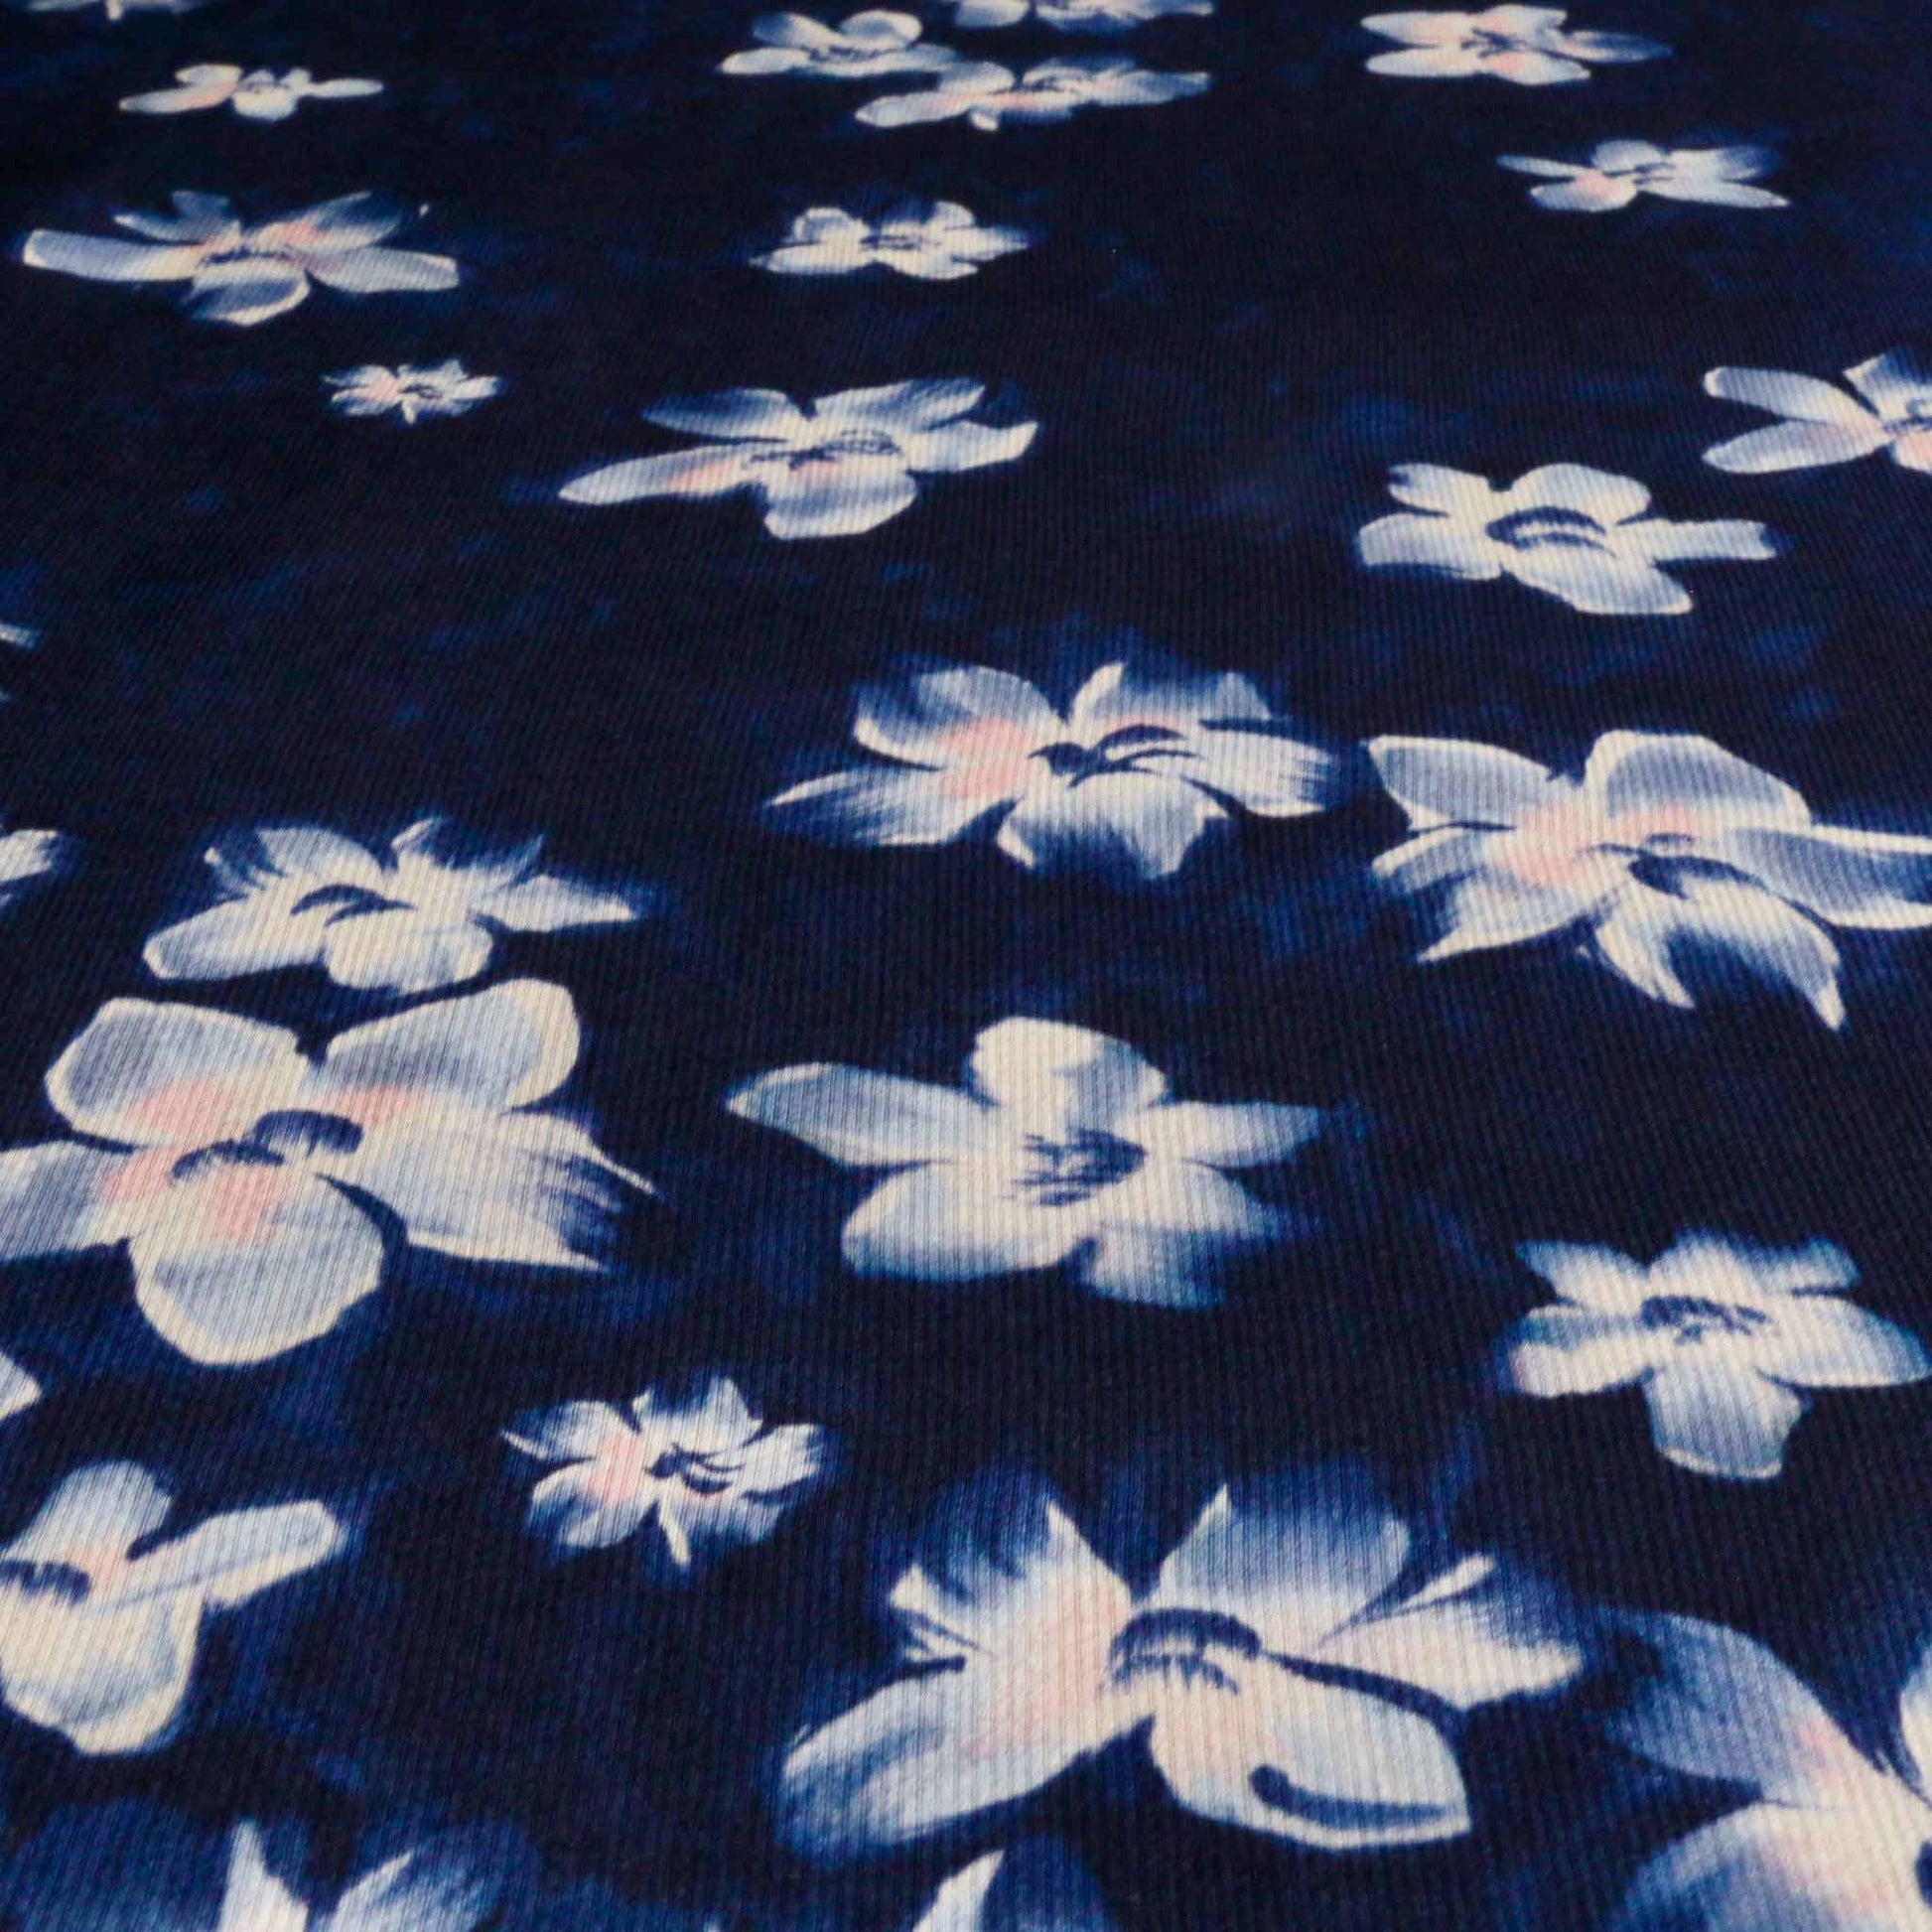 crepe back satin dressmaking fabric in navy blue with white floral print